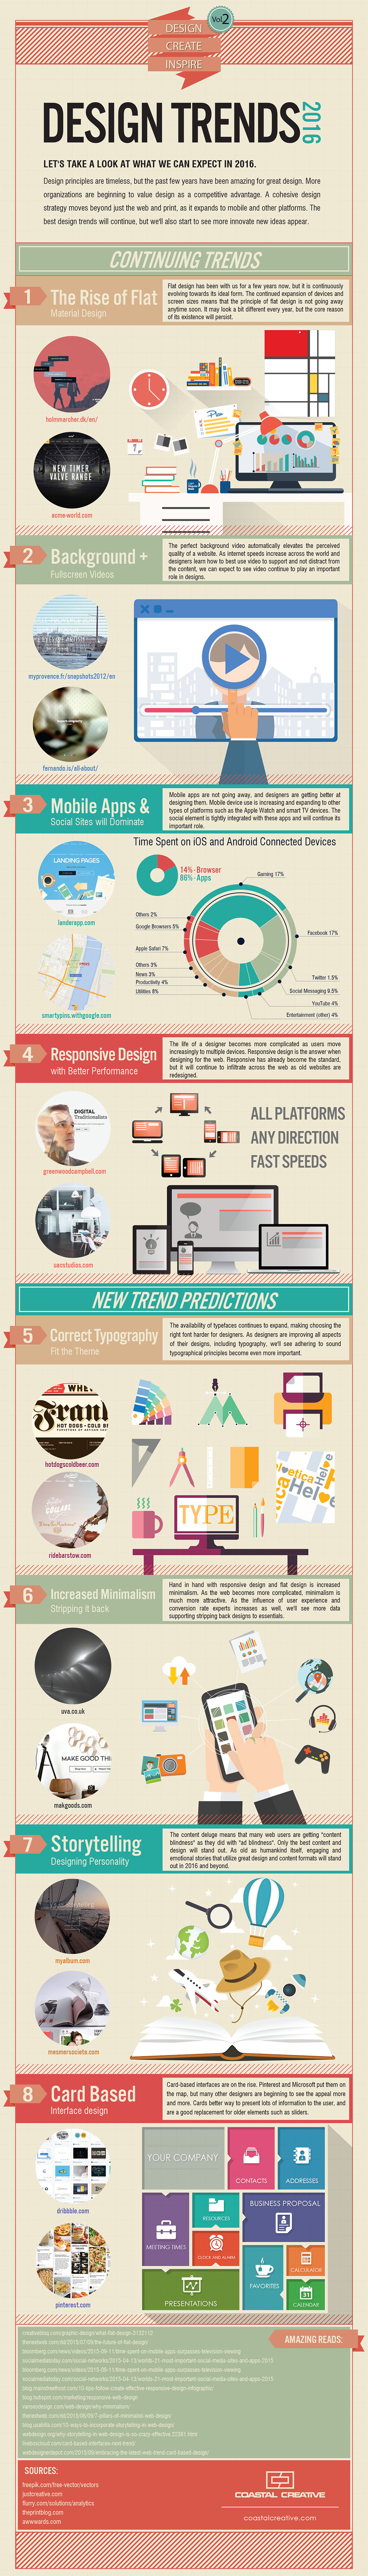 design-trends-to-watch-infographic.jpg